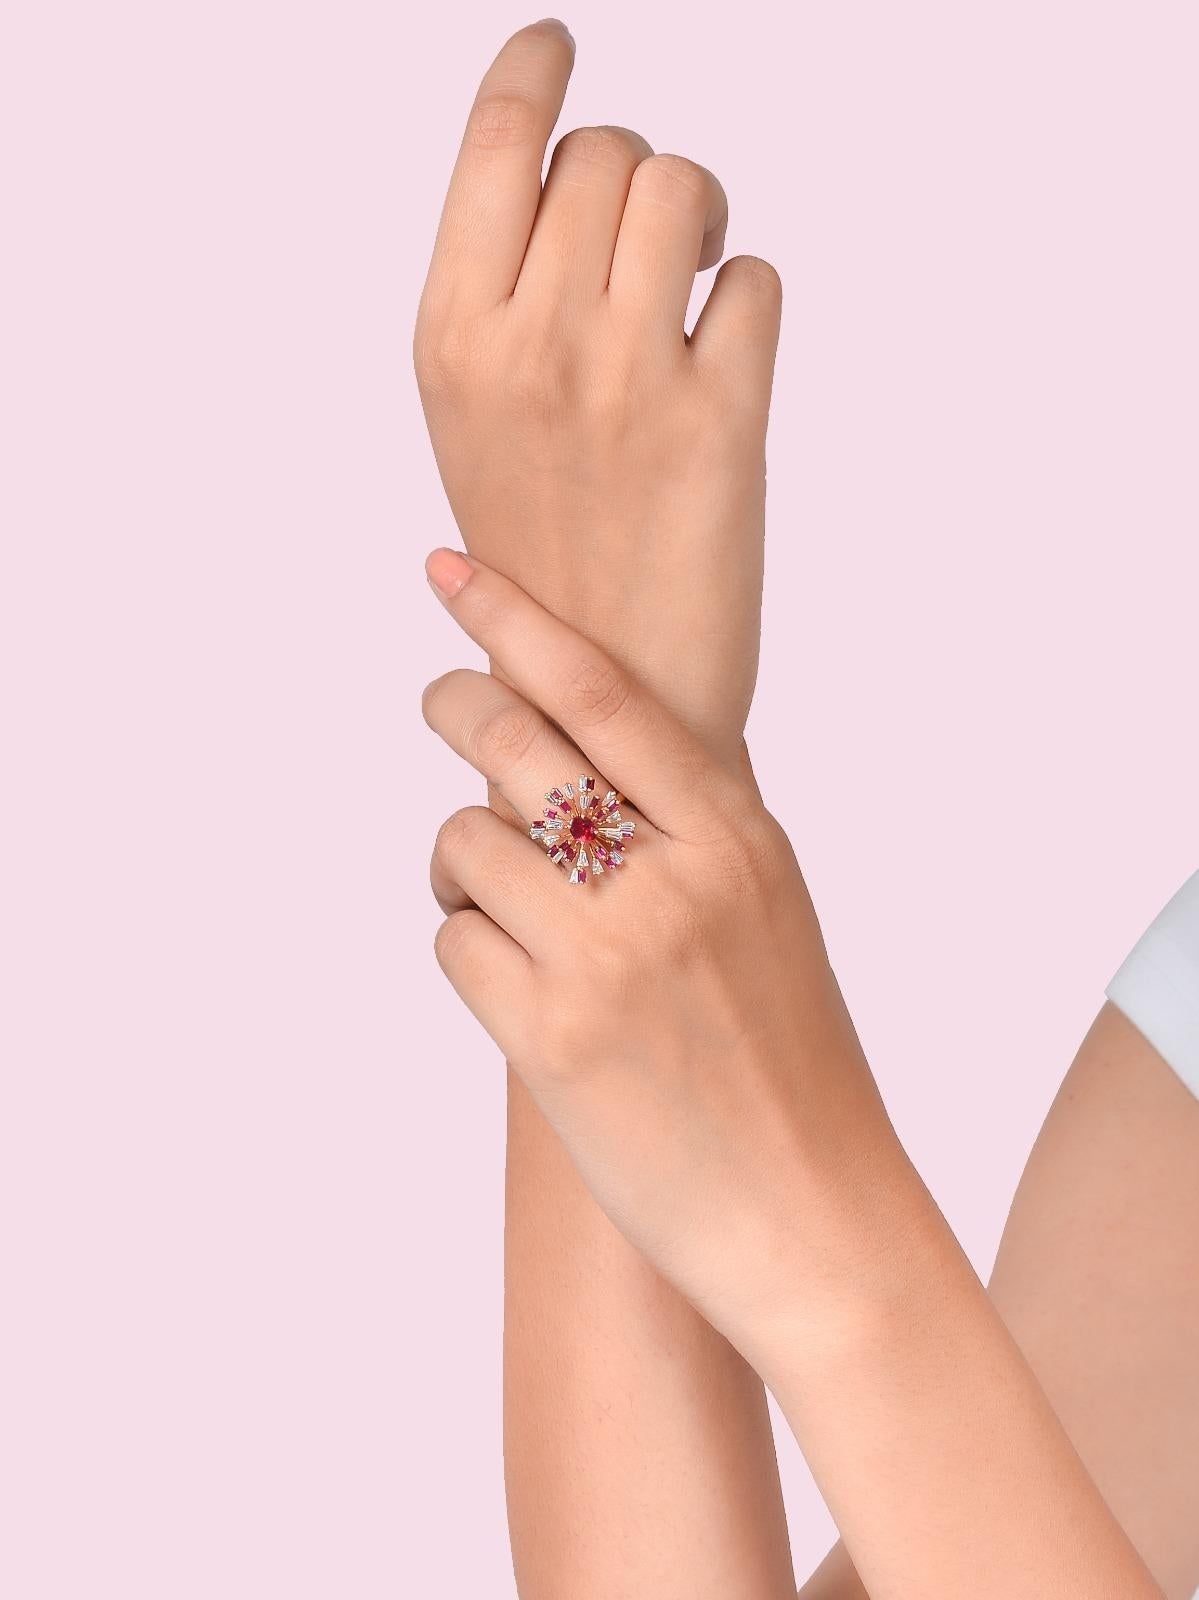 Handmade in Jaipur by extremely skilled artisans, this ring in 18k Gold features a 0.55 cts centre ruby surrounded by Ruby baguettes weighing 1.22 cts and 0.58 cts of Diamond baguettes. 
Our take on a starburst design, the ring is an easy wear yet